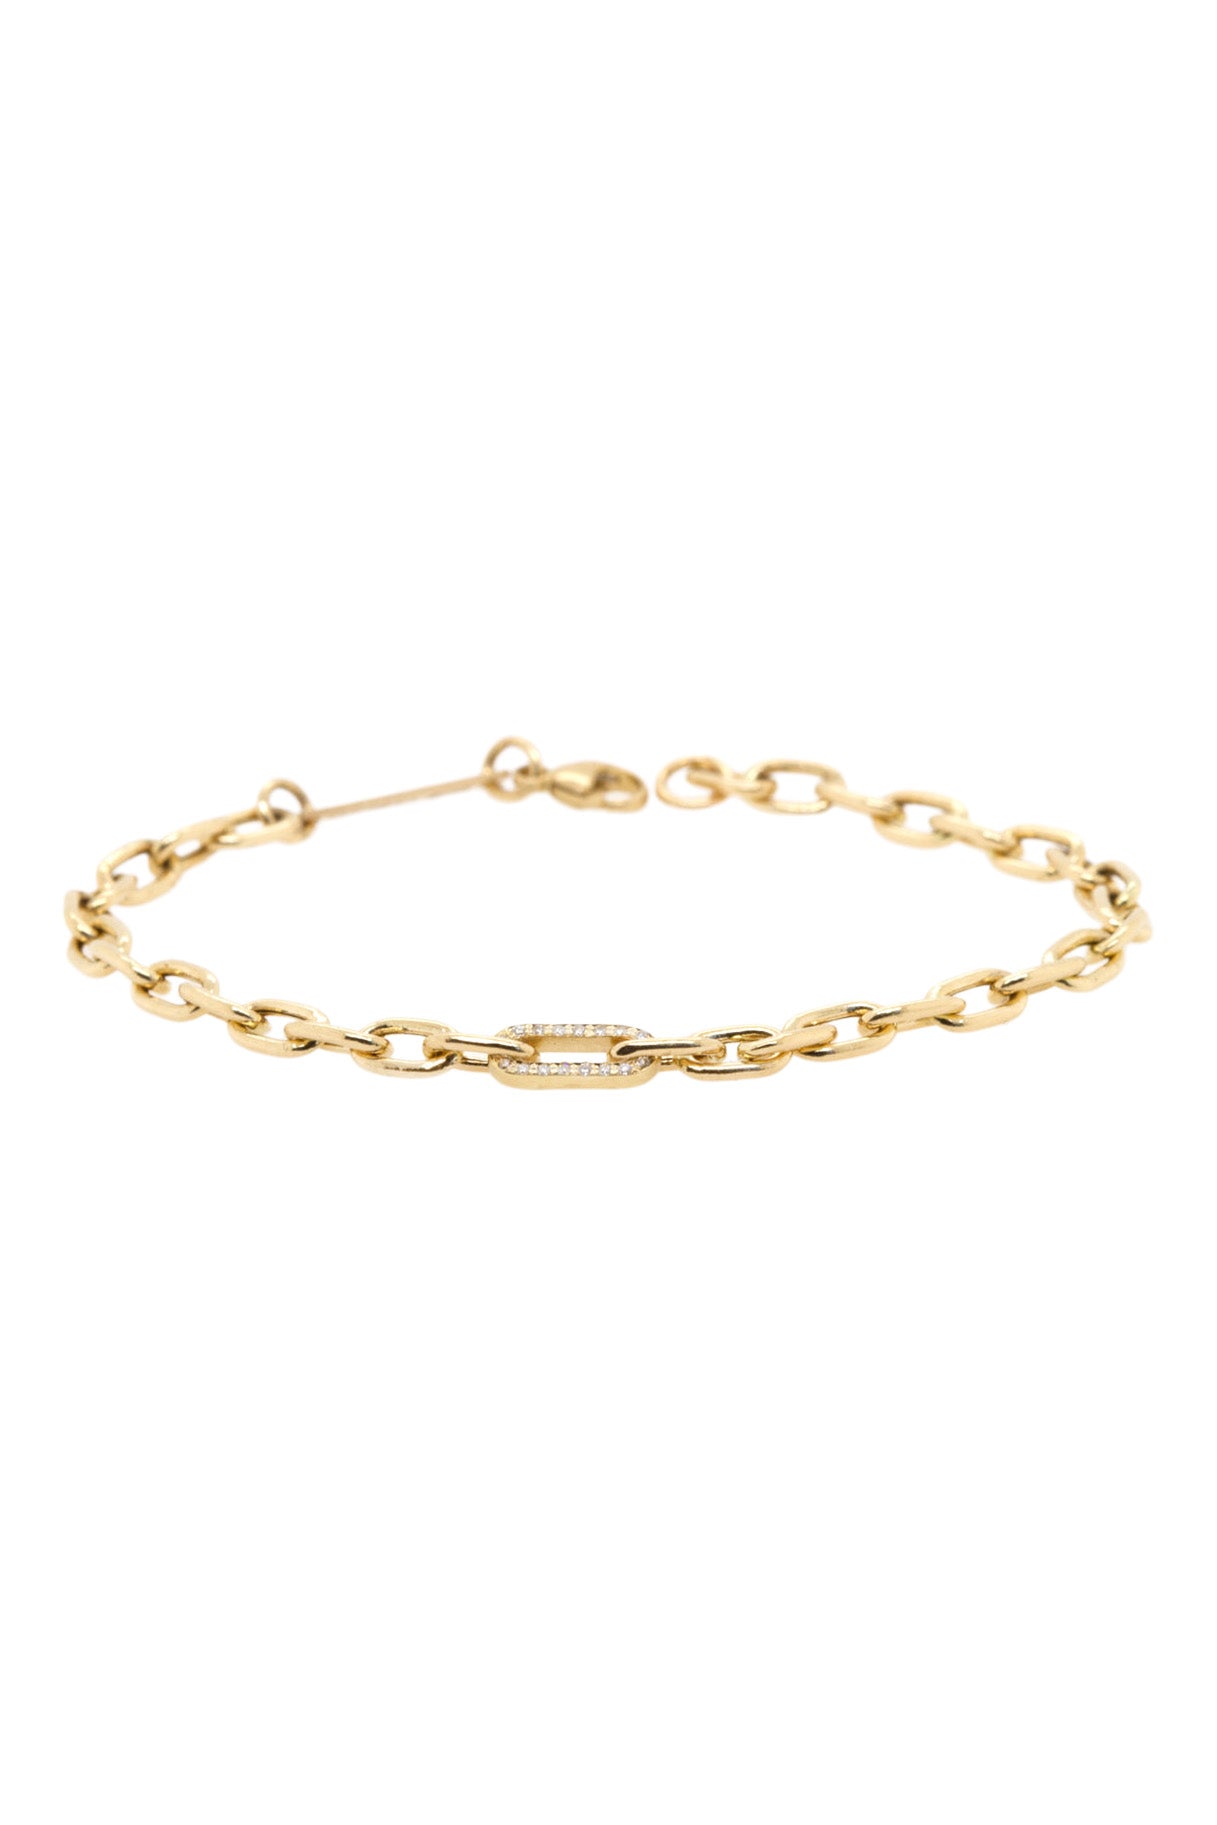 Zoe Chicco Medium Square Oval Chain Bracelet with Pavé Diamond Link in 14k Yellow gold